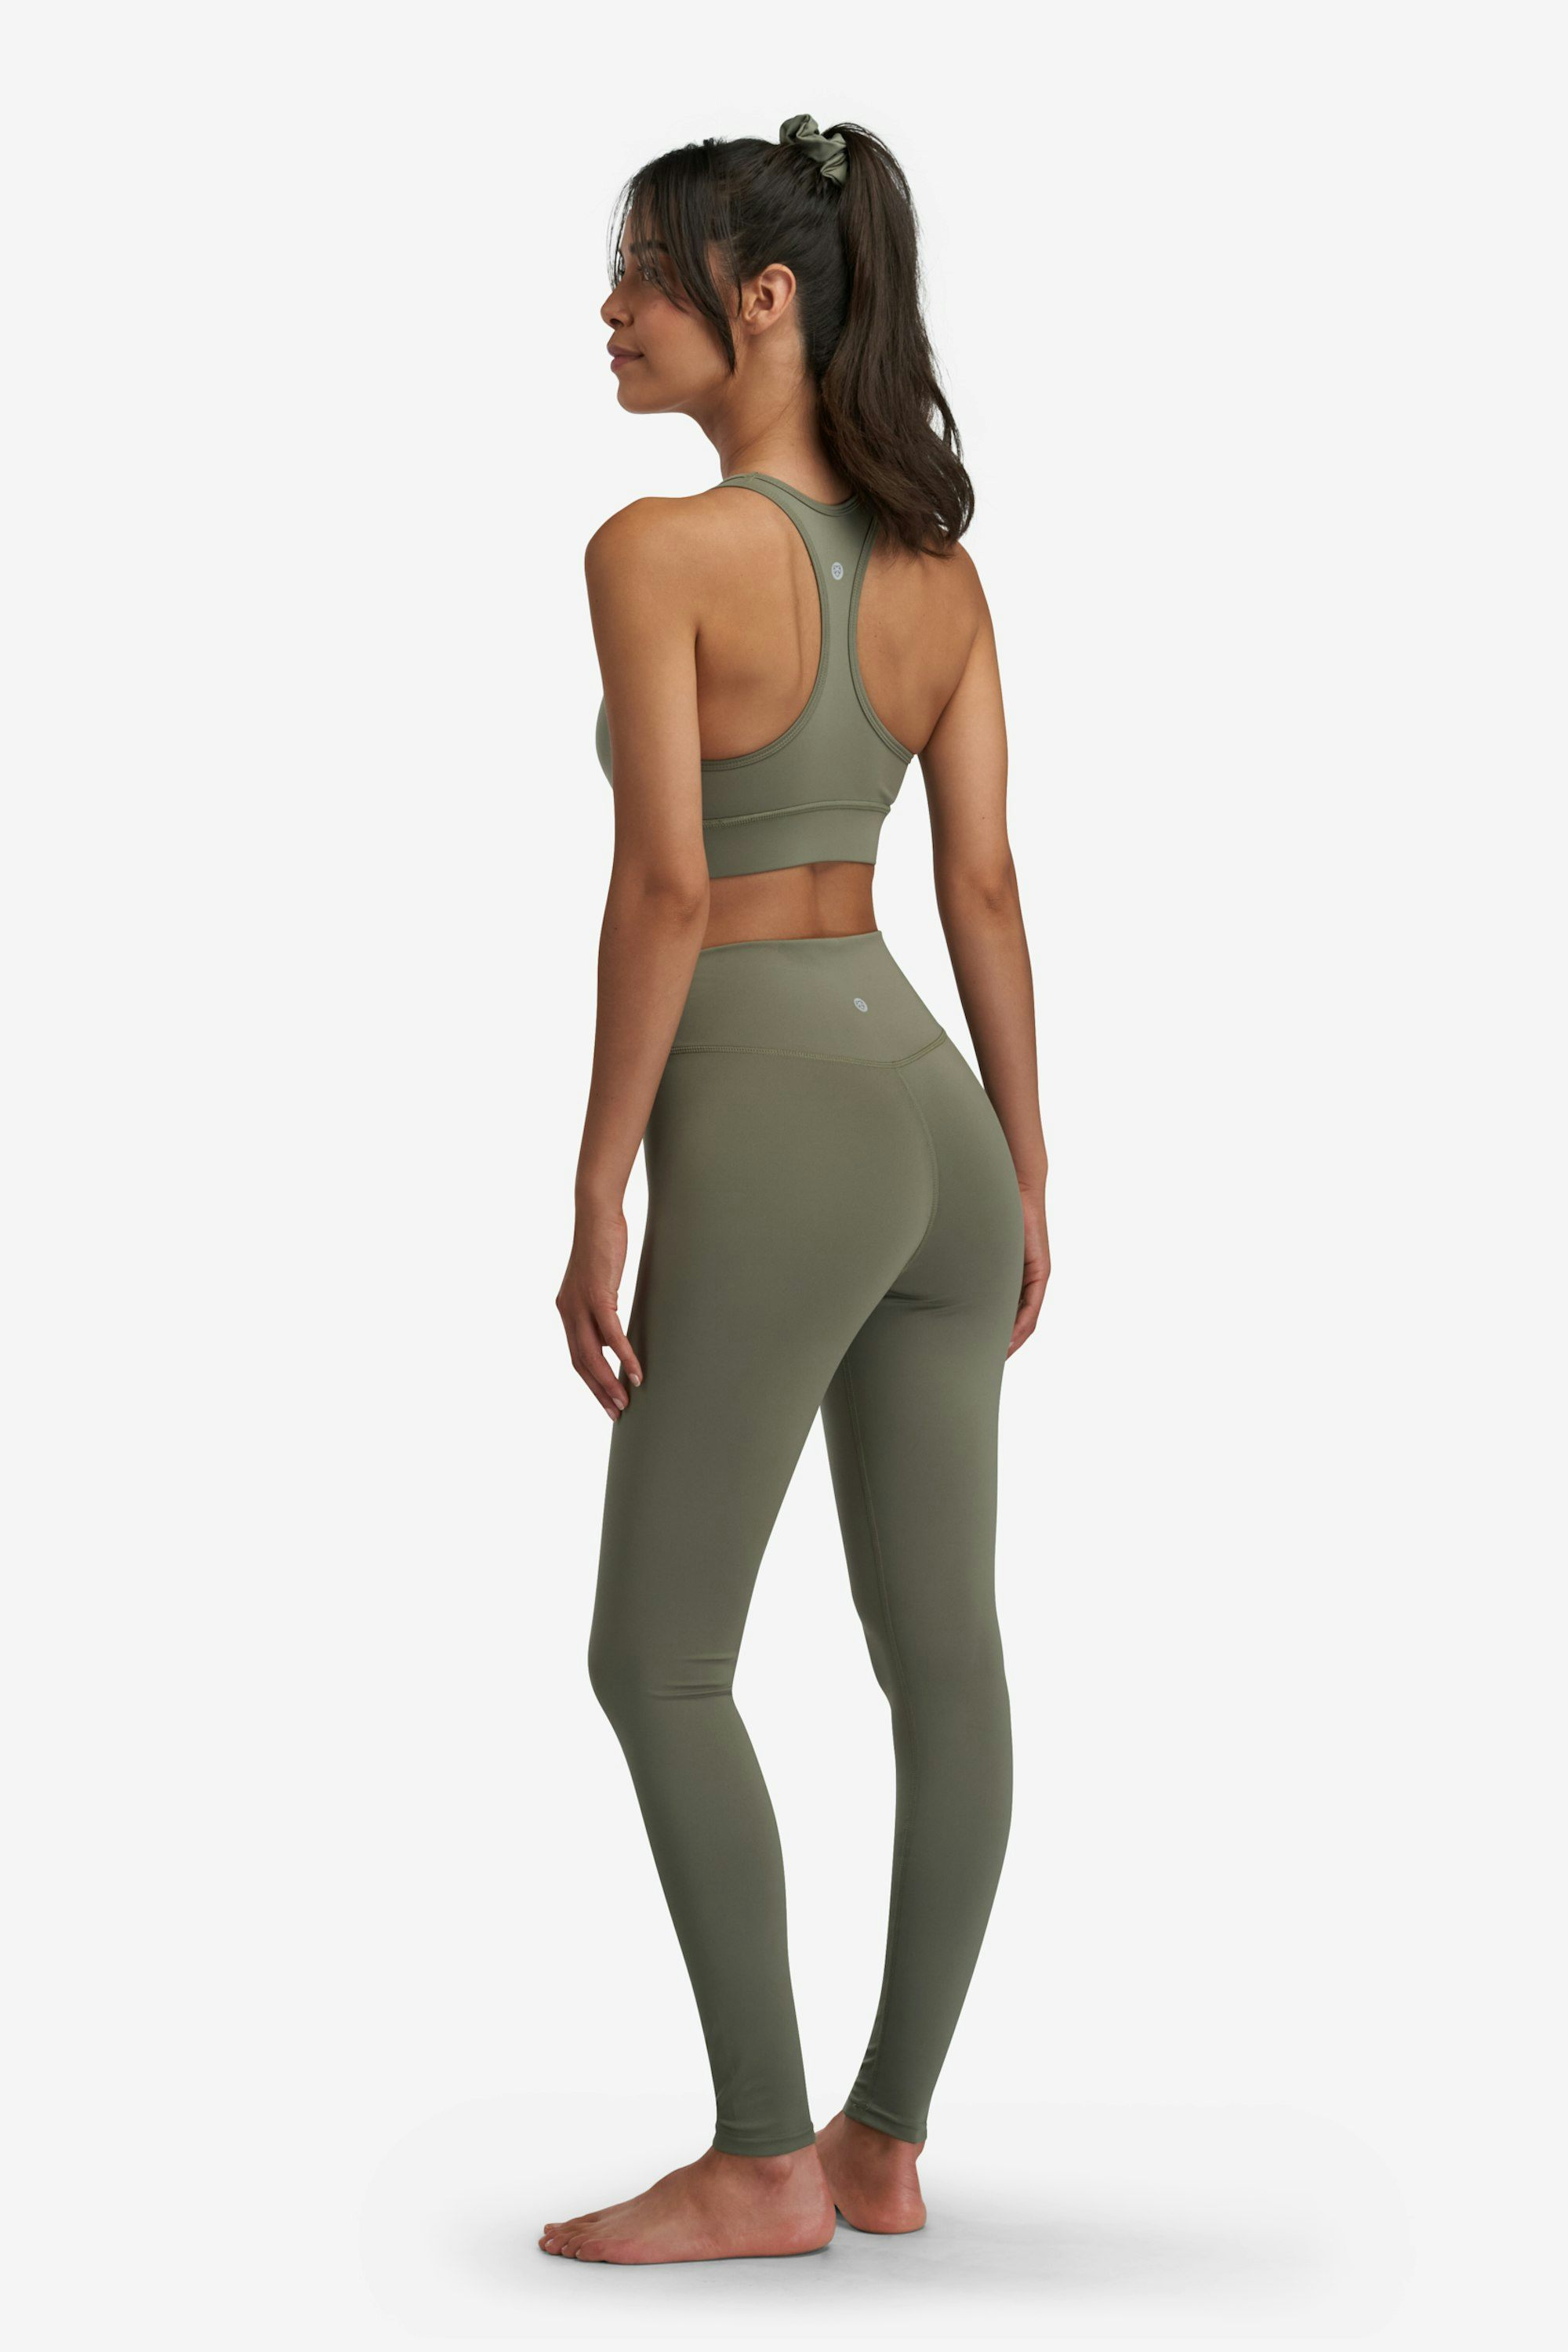 A-dam solid olive active leggings from recycled plastic bottles